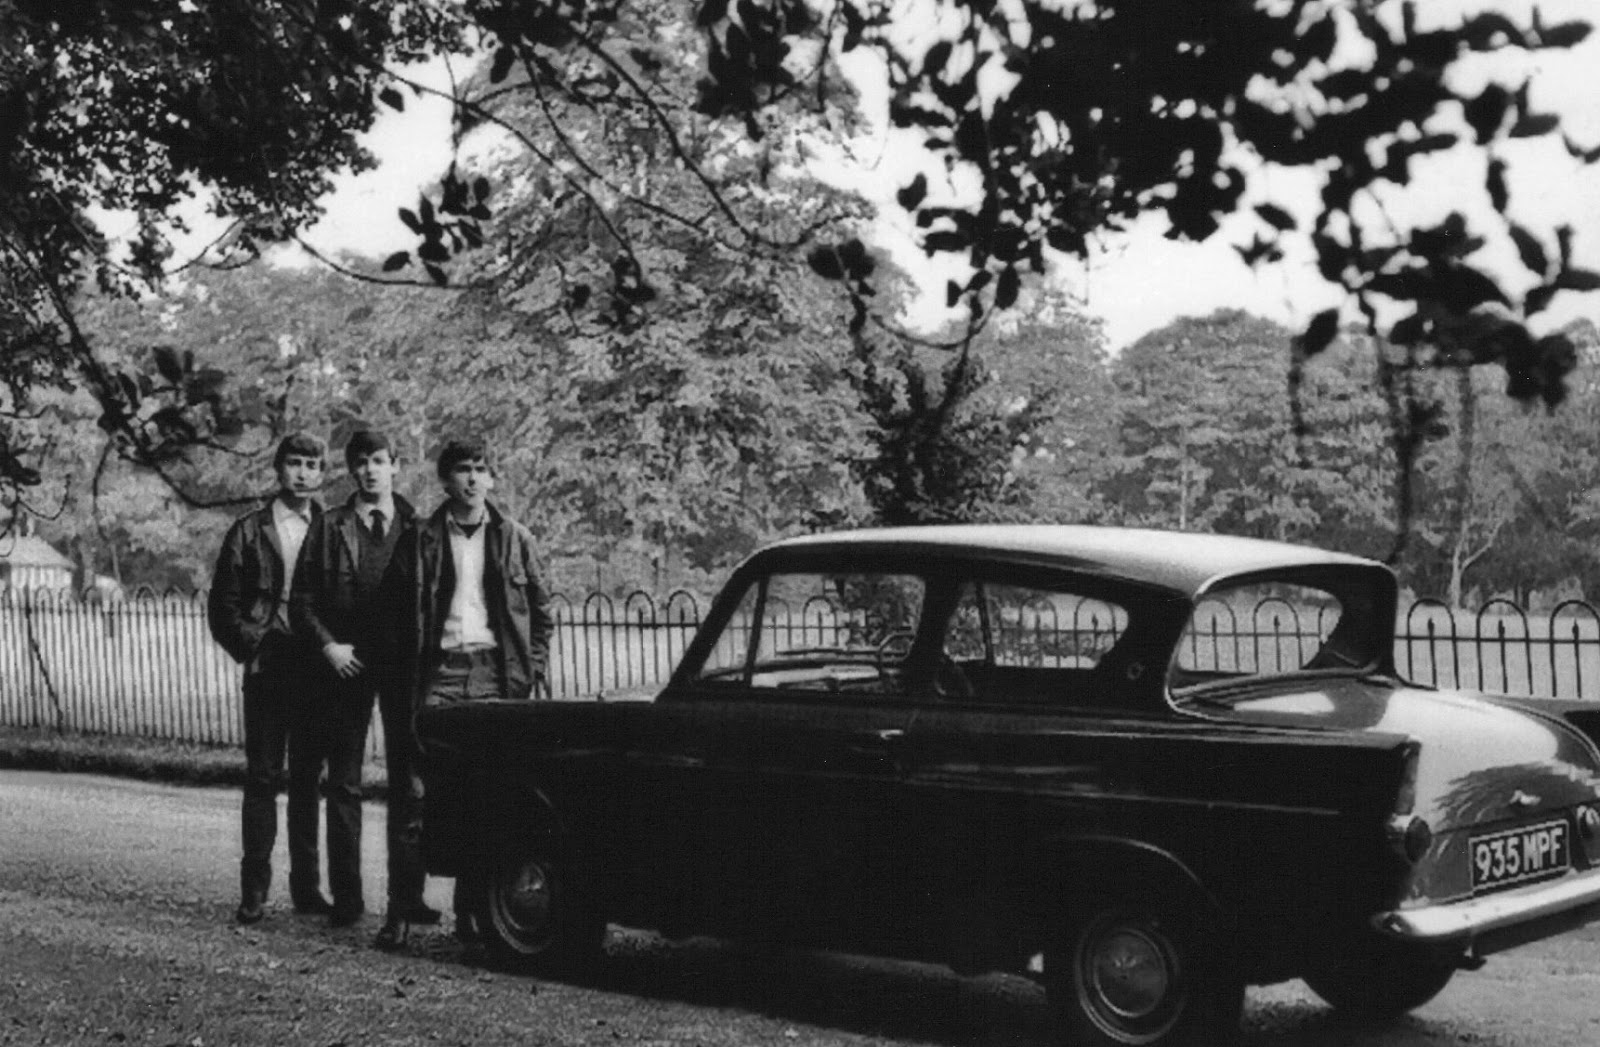 Meet the Beatles for Real: Boys and cars